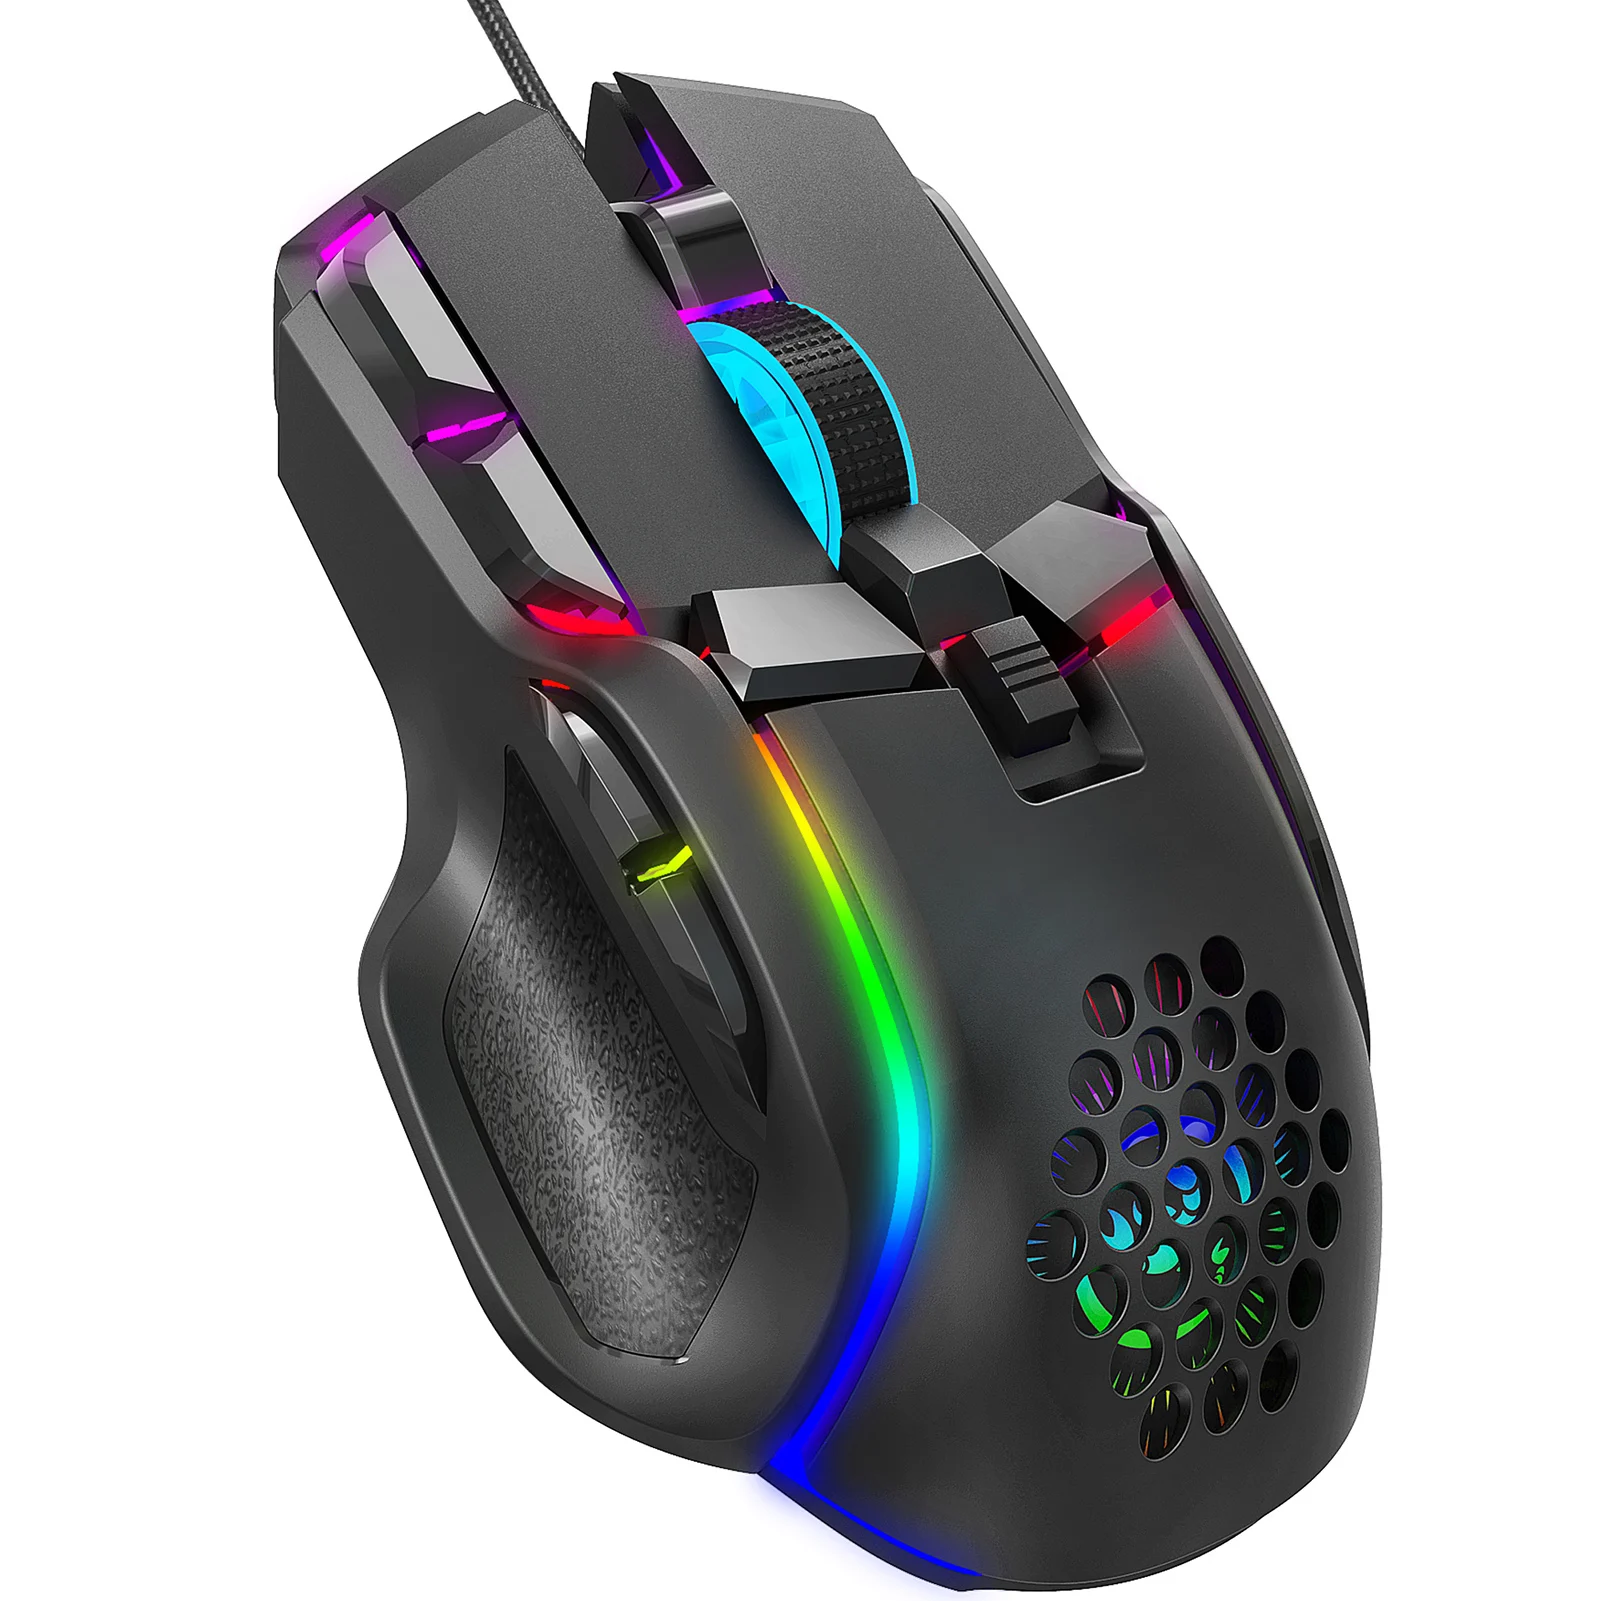 

HXSJ S700 10 Keys Wired Gaming Mouse Macro Programming Ergonomic Mice with 6 Adjustable DPI RGB Light Effect Wide Compatibility